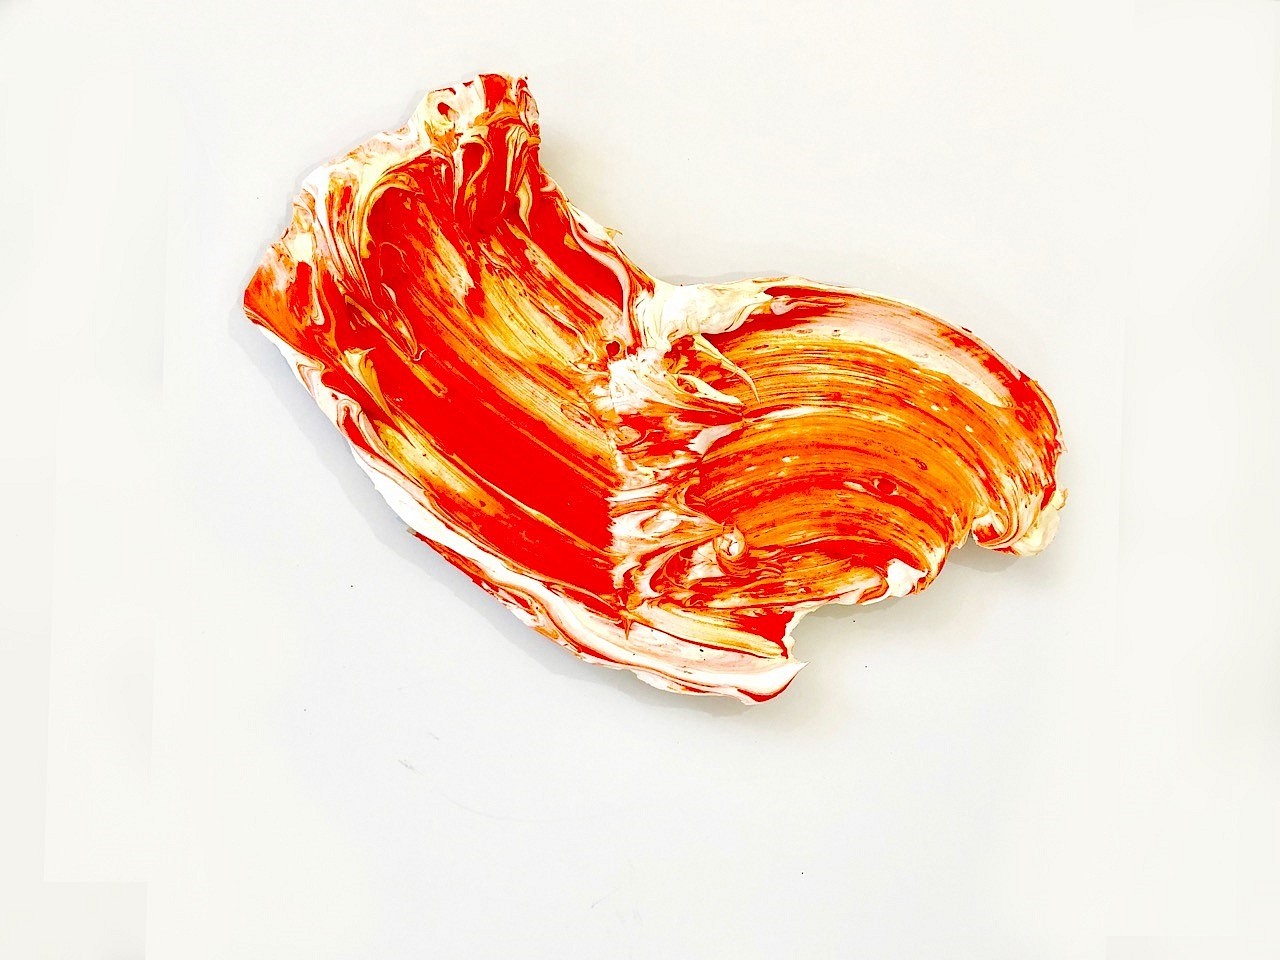 Donald Martiny, Study for Hyco, 2018
polymer and pigment on aluminum, 19 x 12 in.
MART00076